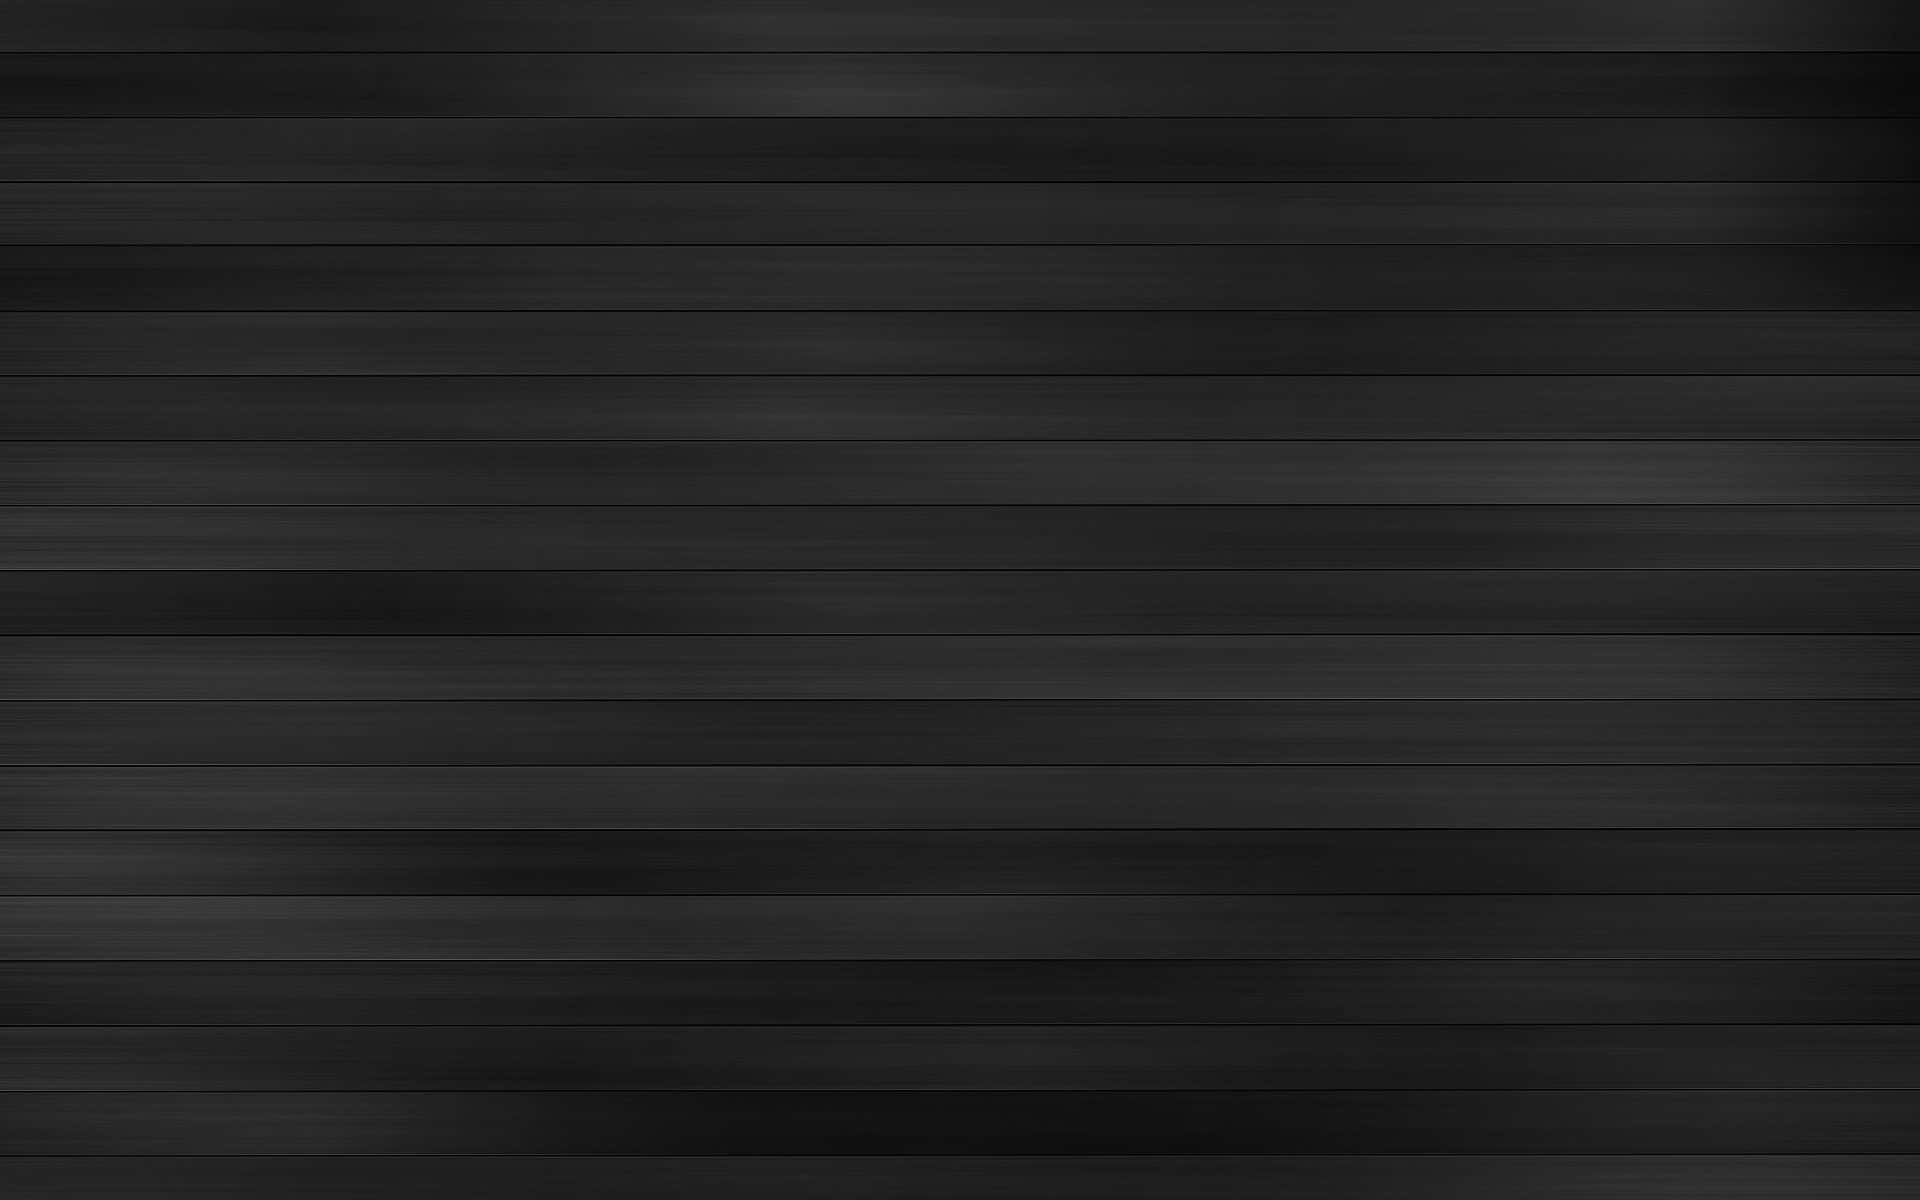 Symmetrical Abstract Artwork in Shades of Black and Gray Wallpaper